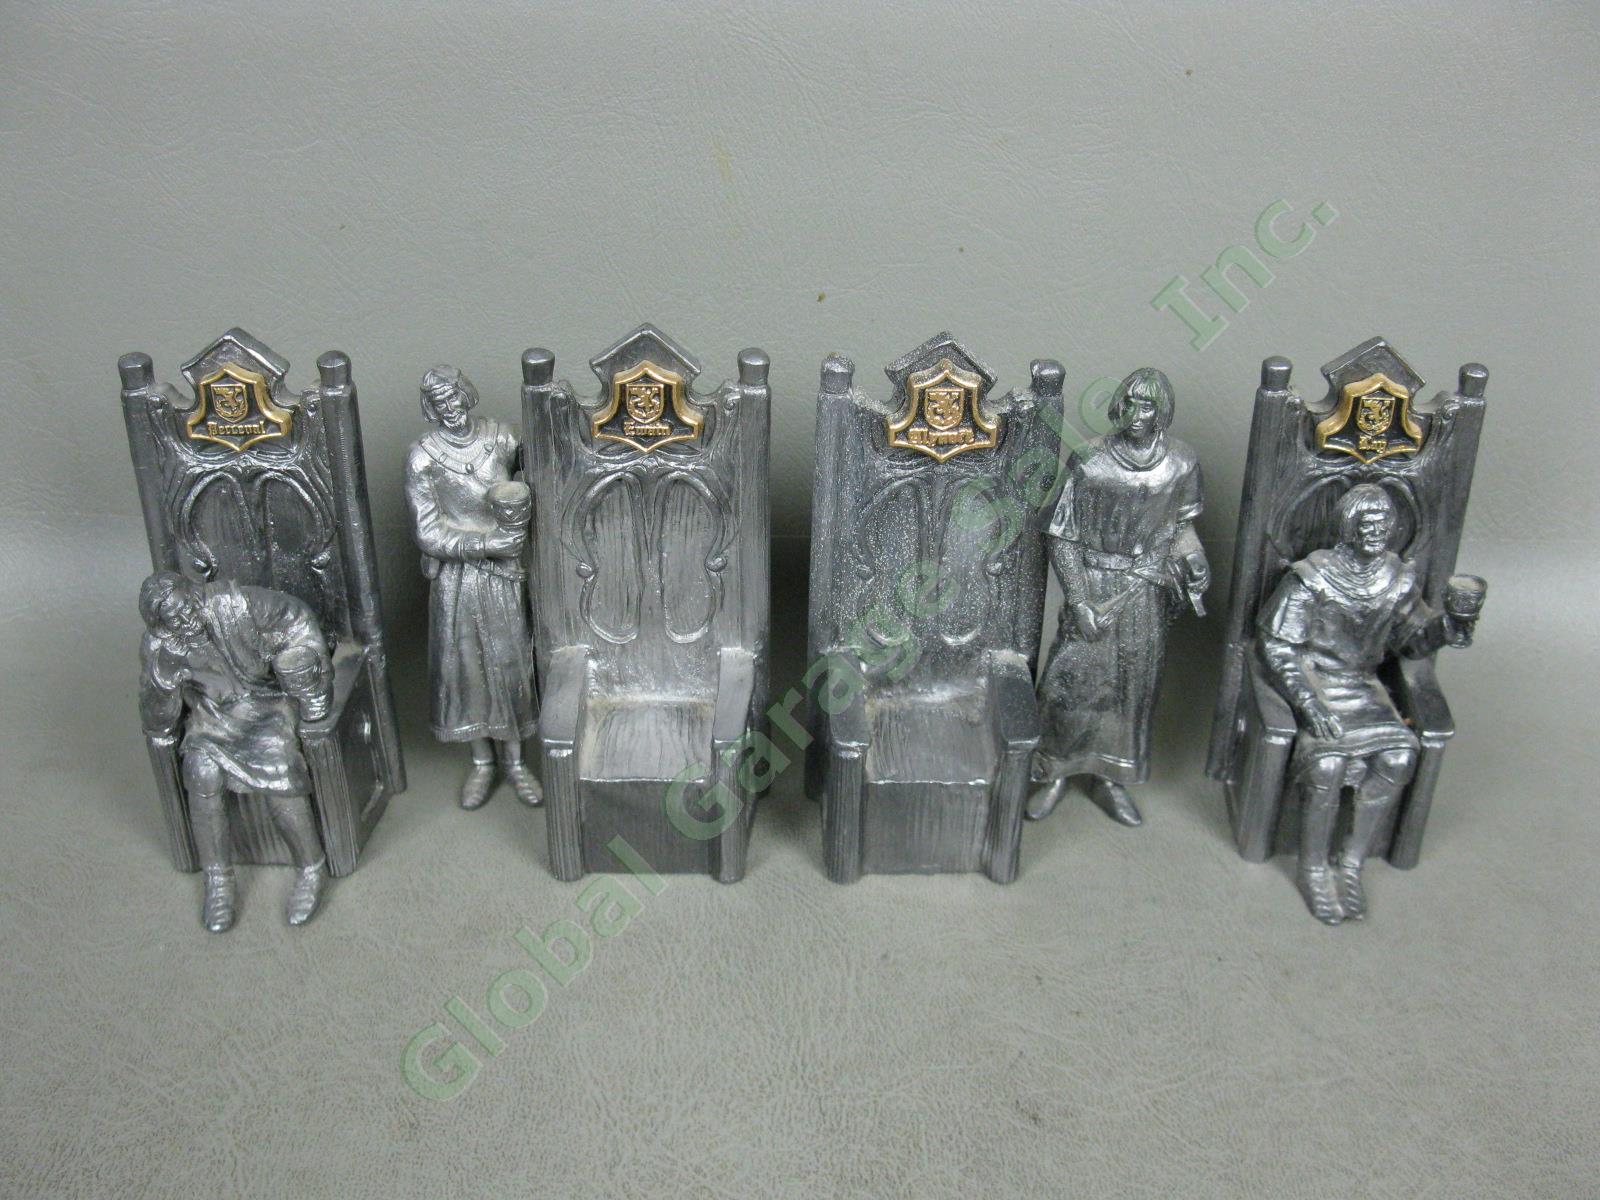 Michael Ricker Pewter Knights Of The Round Table Sculpture Statue Figure Set Lot 3